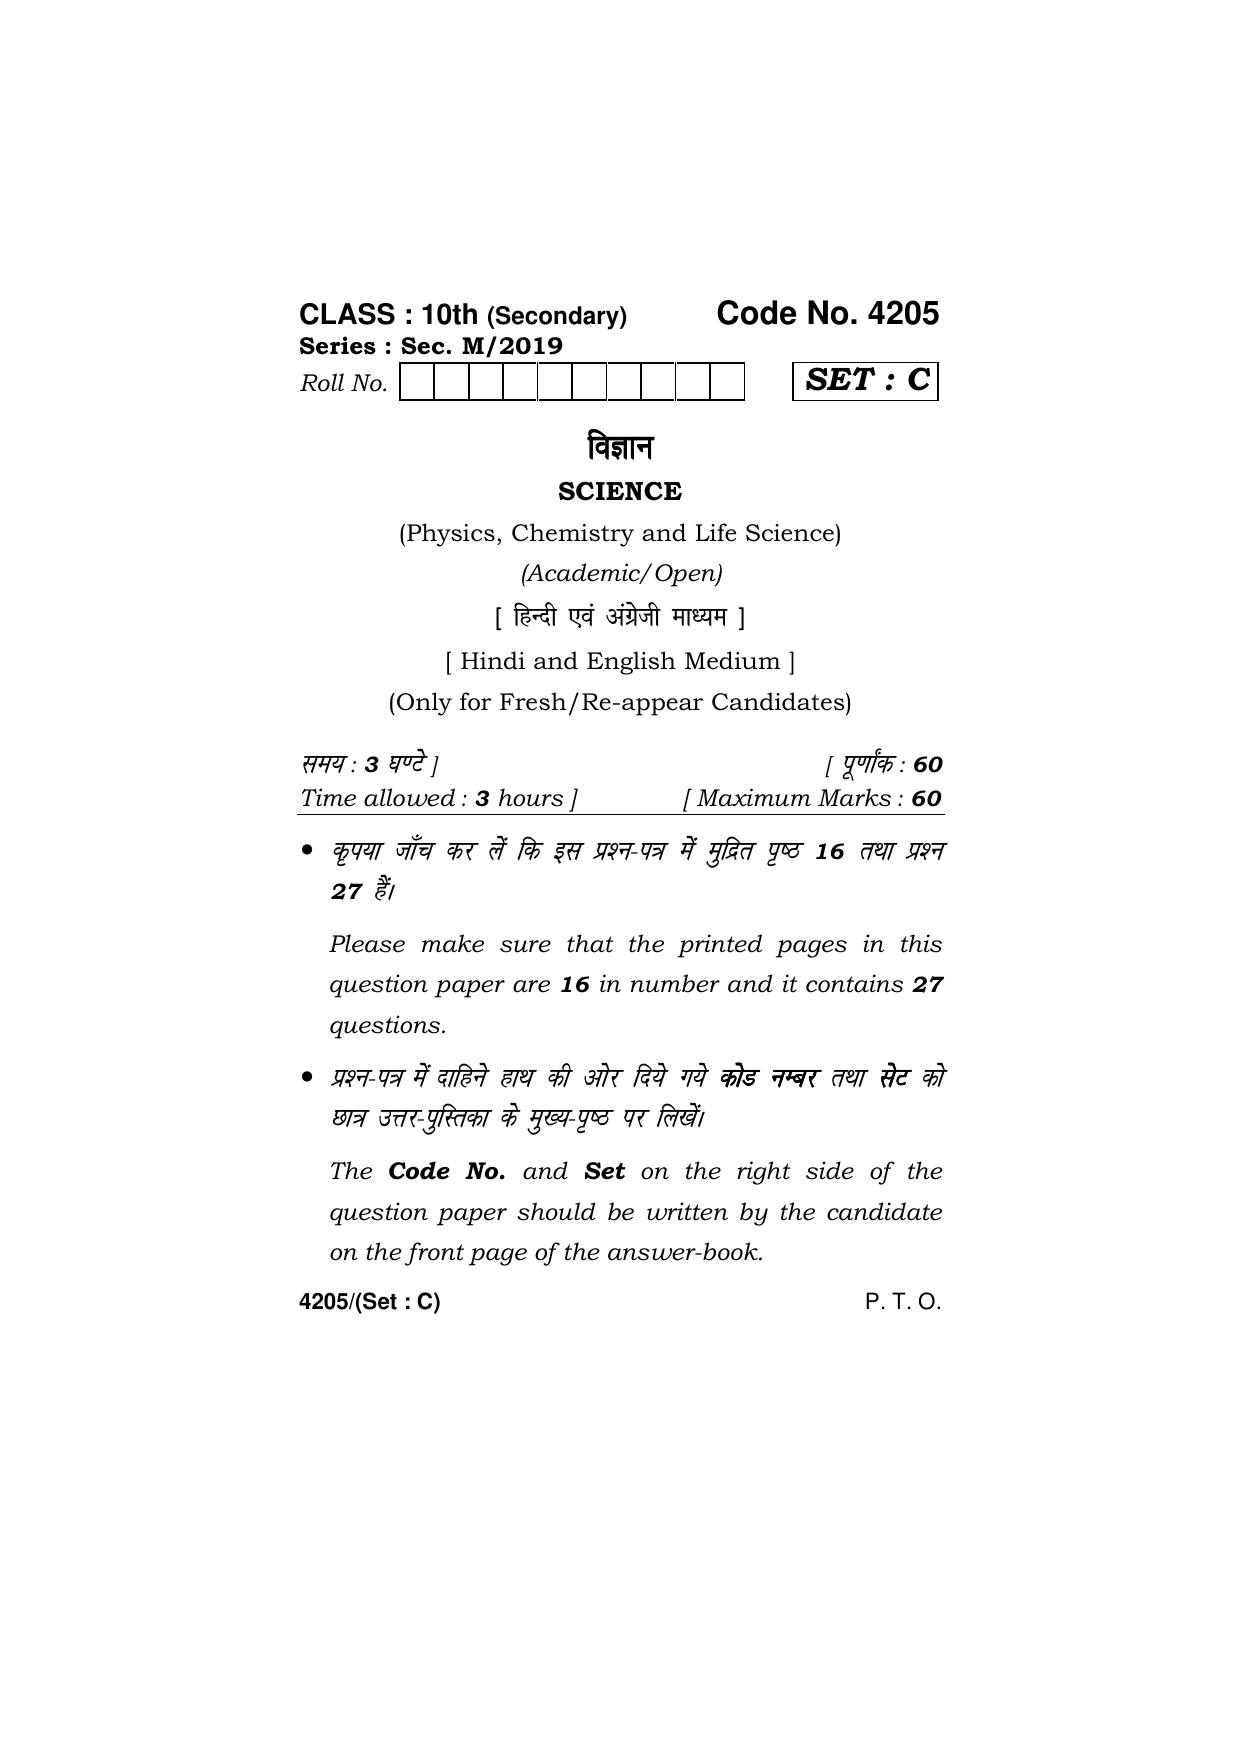 Haryana Board HBSE Class 10 Science (All Set) 2019 Question Paper - Page 33